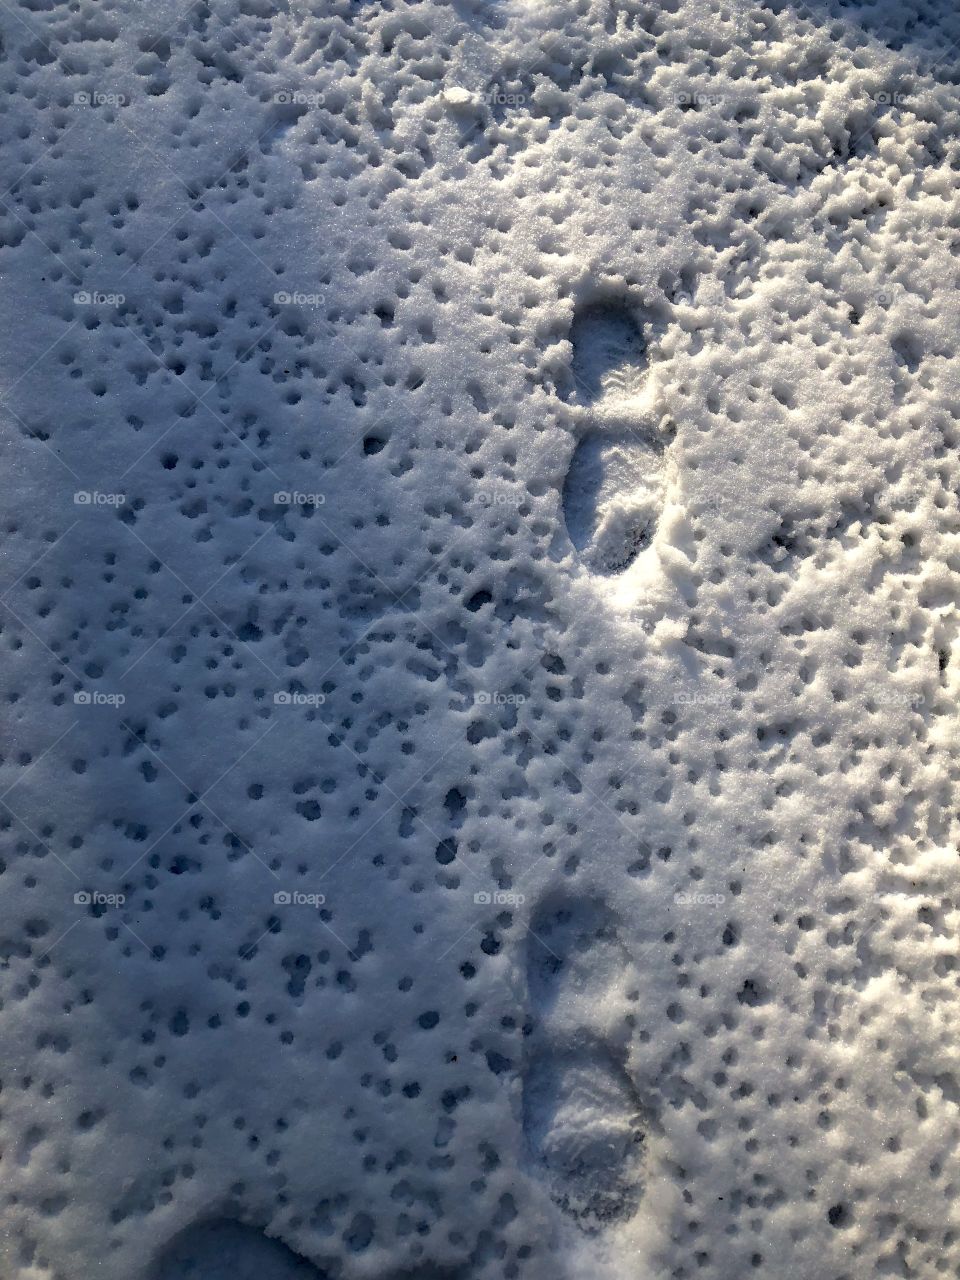 Overhead view of "Footprints and Water Drops" imprinted in the hard, textured snow covering the ground. The melting snow and ice drips from trees onto the ground, making little holes in the snow. 